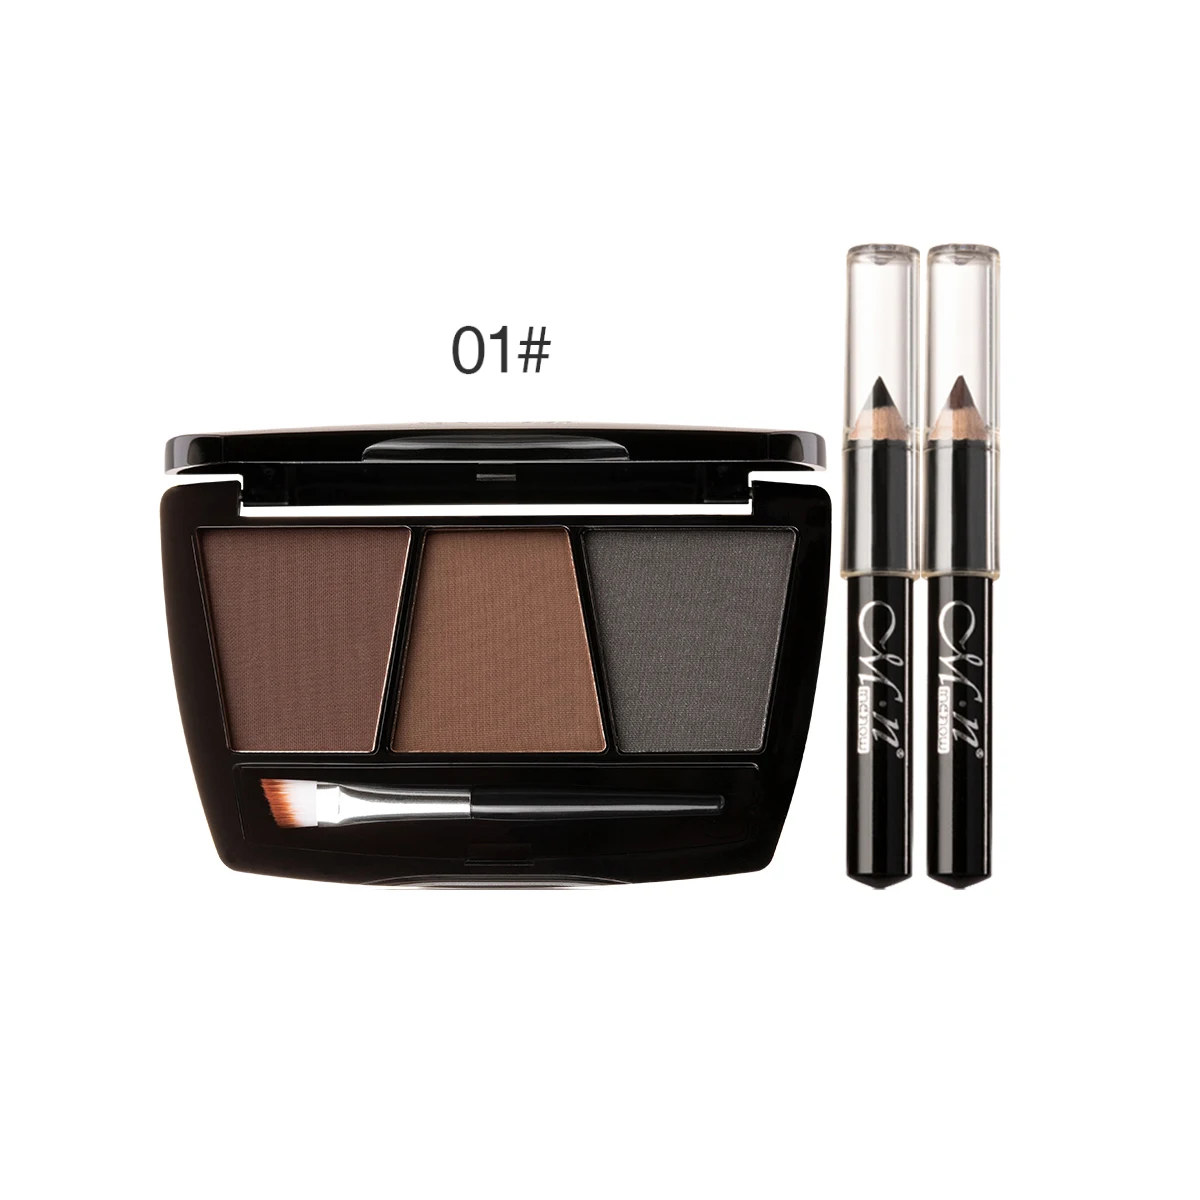 

3 Color Eyebrow Powder Makeup Palette Natural Brown Eye Brow Enhancers Eye Brows Shadow Cake Beauty Kit, As pictures